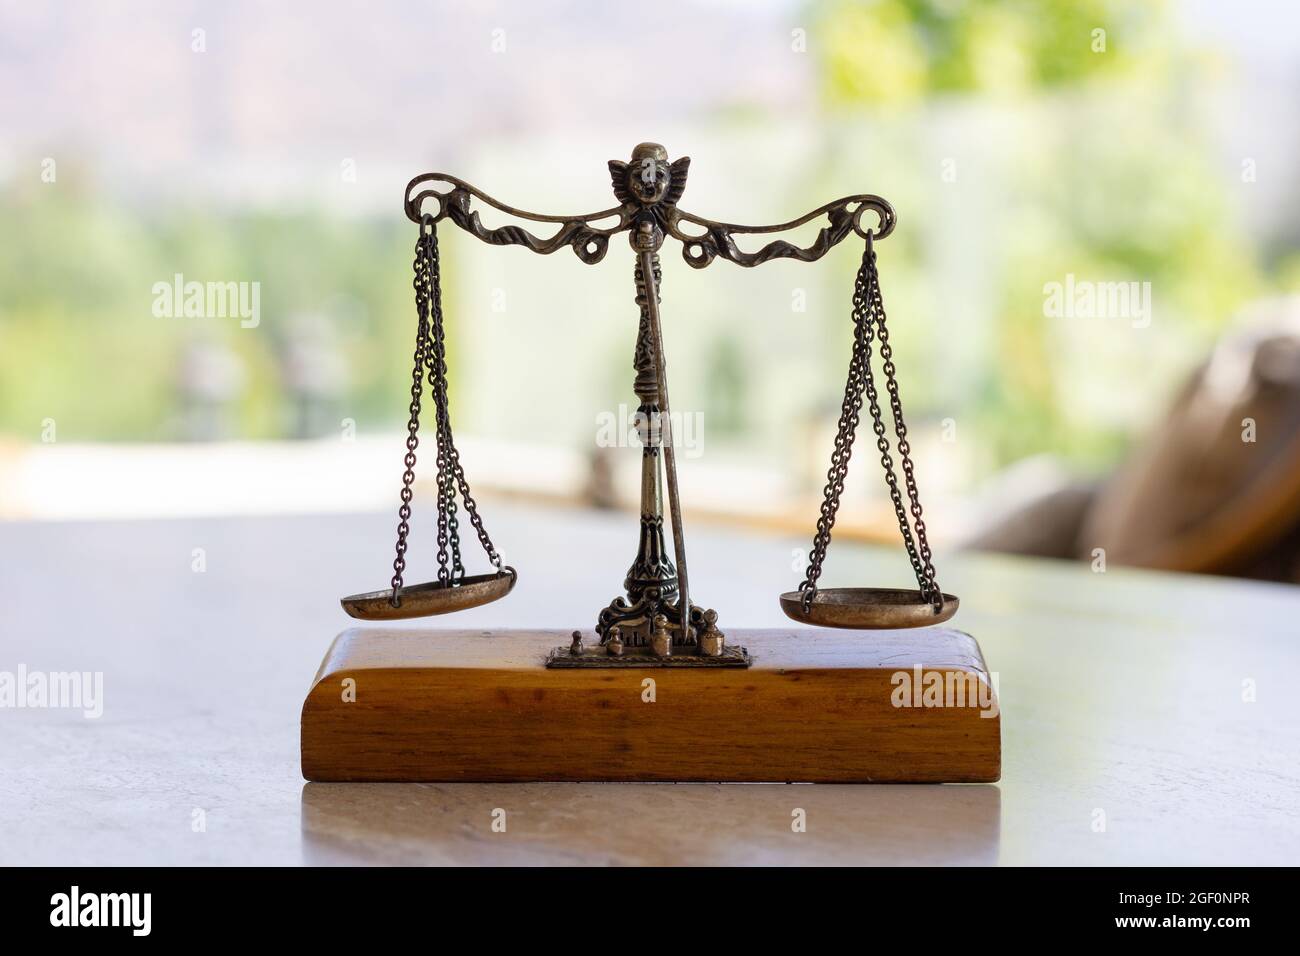 Weighing scale miniature. Weigh instrument, law, justice concepts Stock Photo